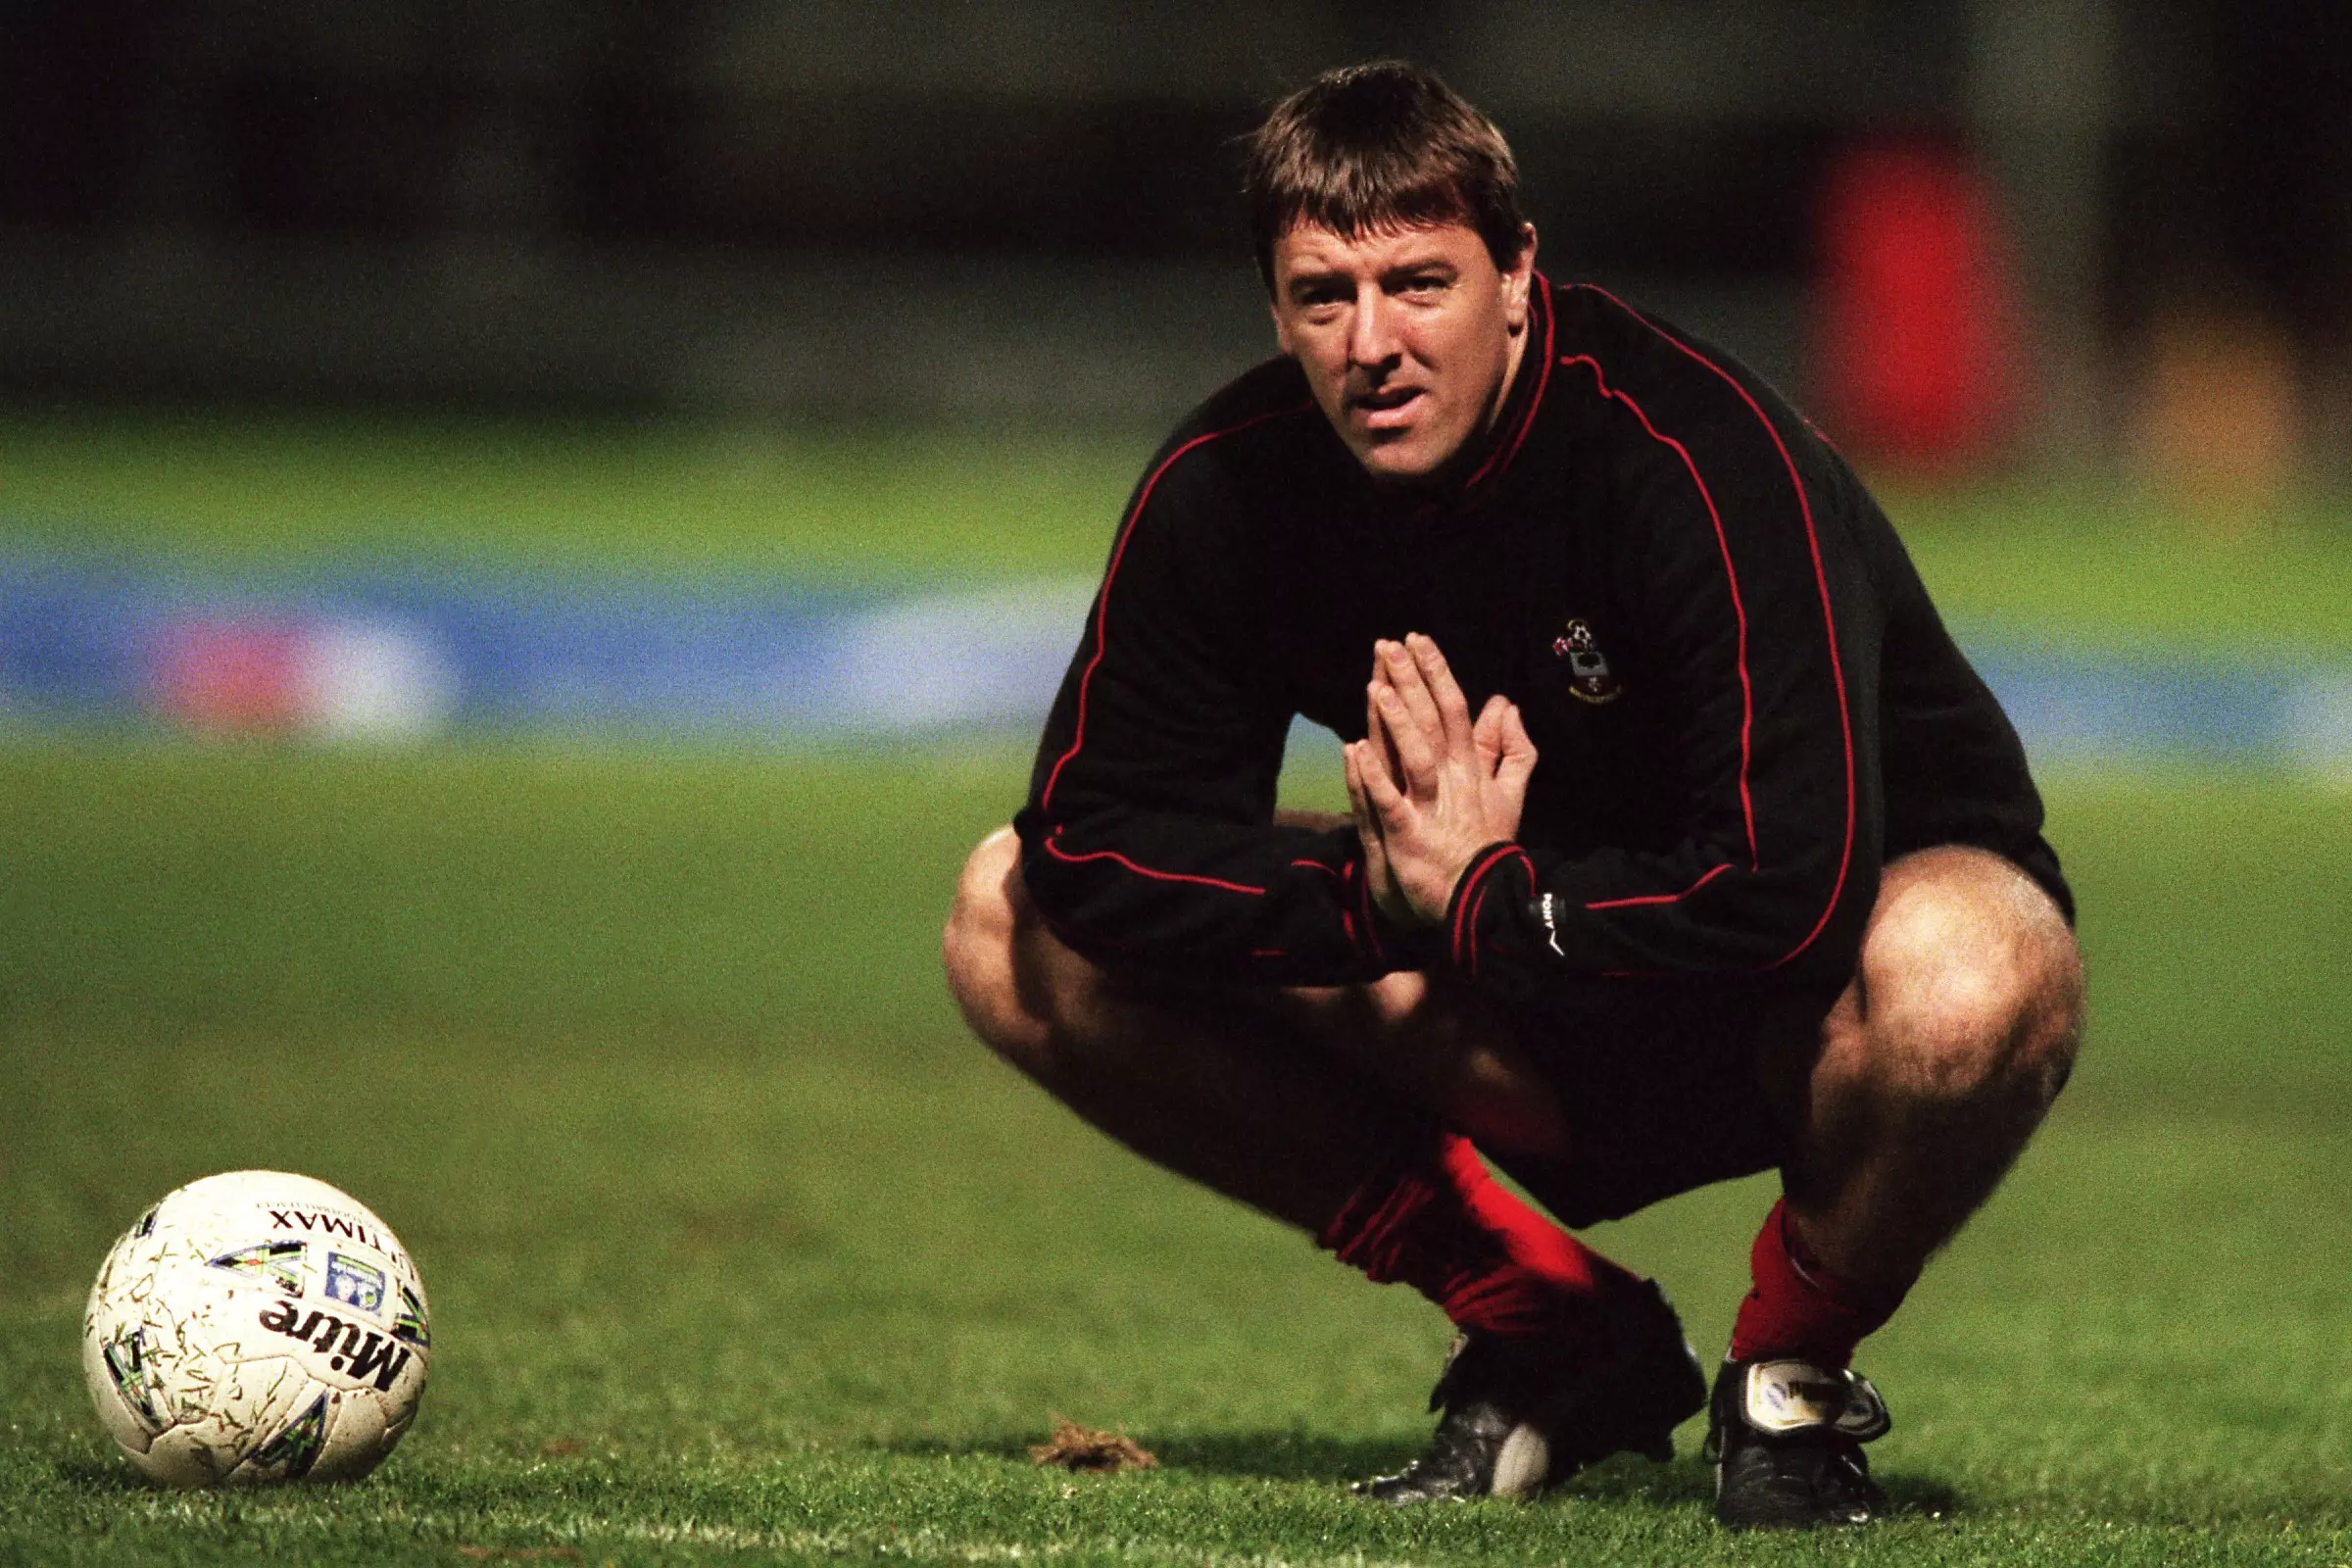 Southampton Legend Matt Le Tissier Latest To Come Forward In Sexual Abuse Scandal